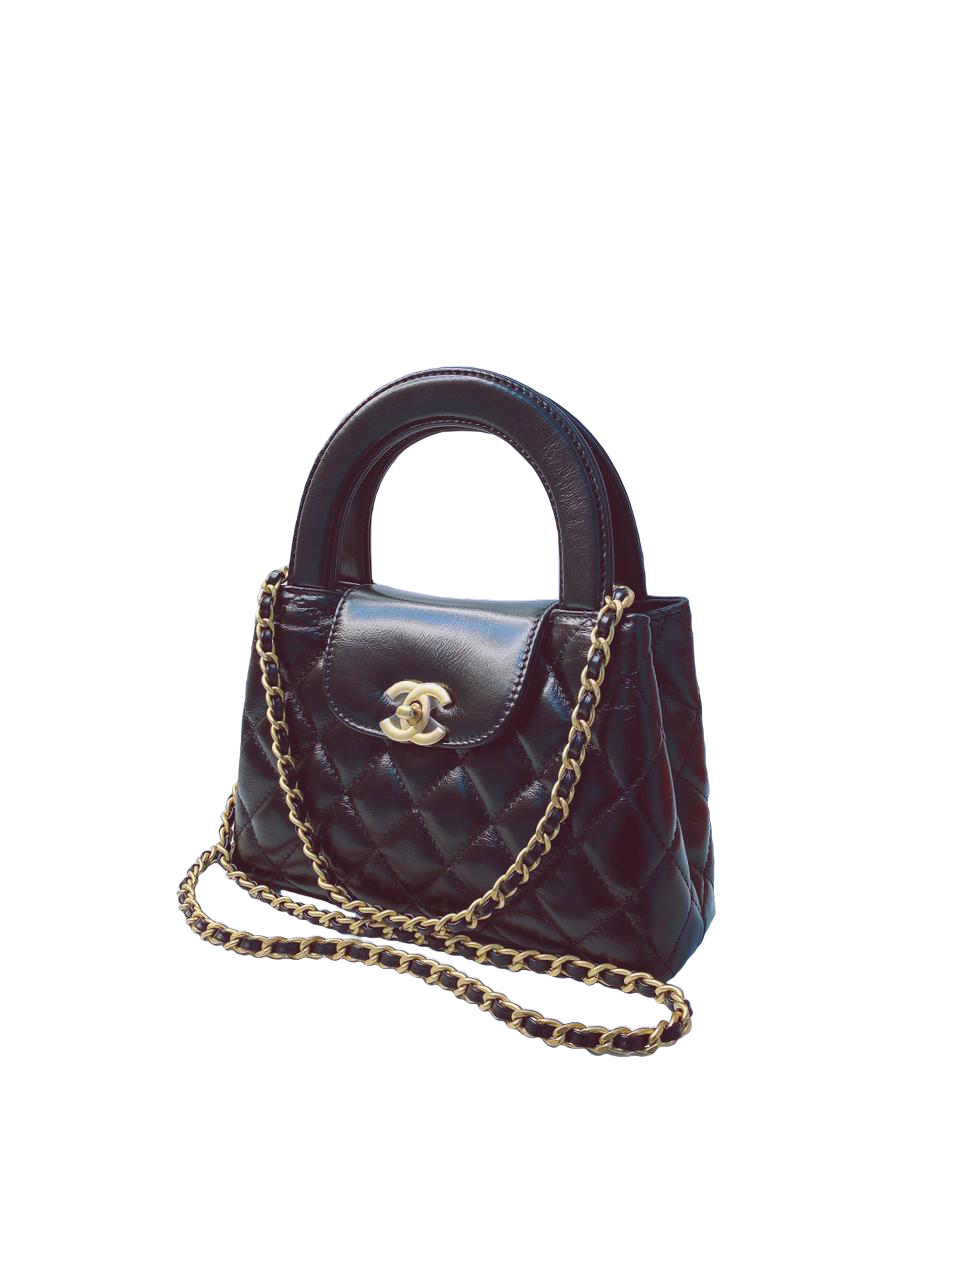 BLACK AGED CALFSKIN QUILTED MINI KELLY SHOPPER BAG - styleforless